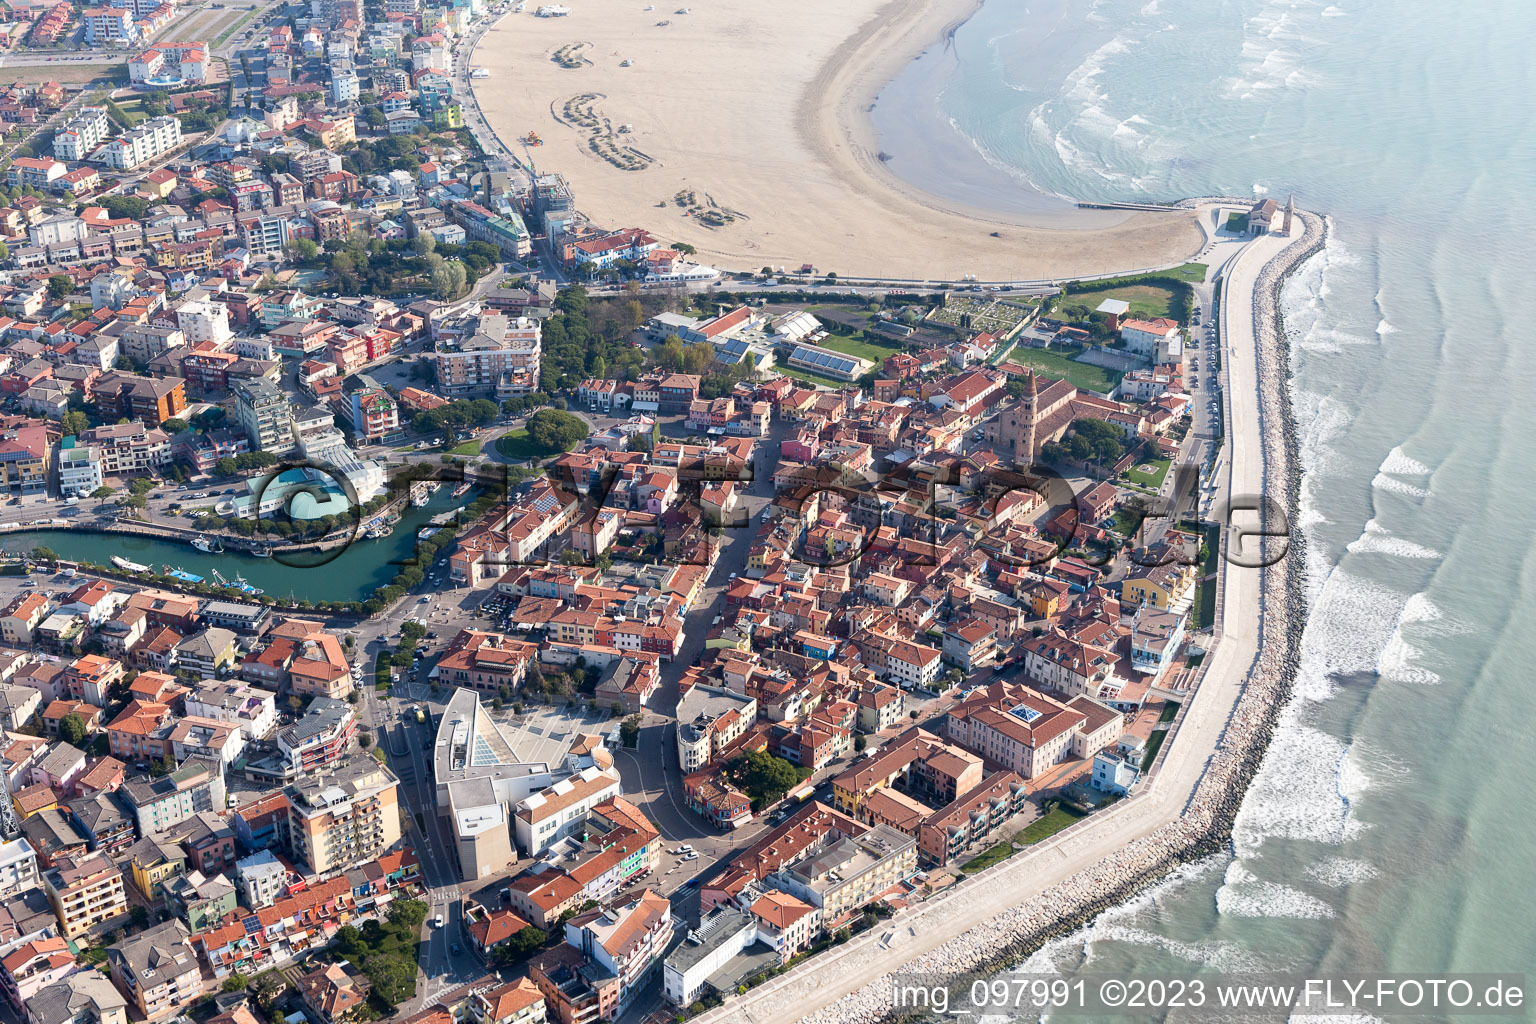 Bird's eye view of Caorle in the state Veneto, Italy